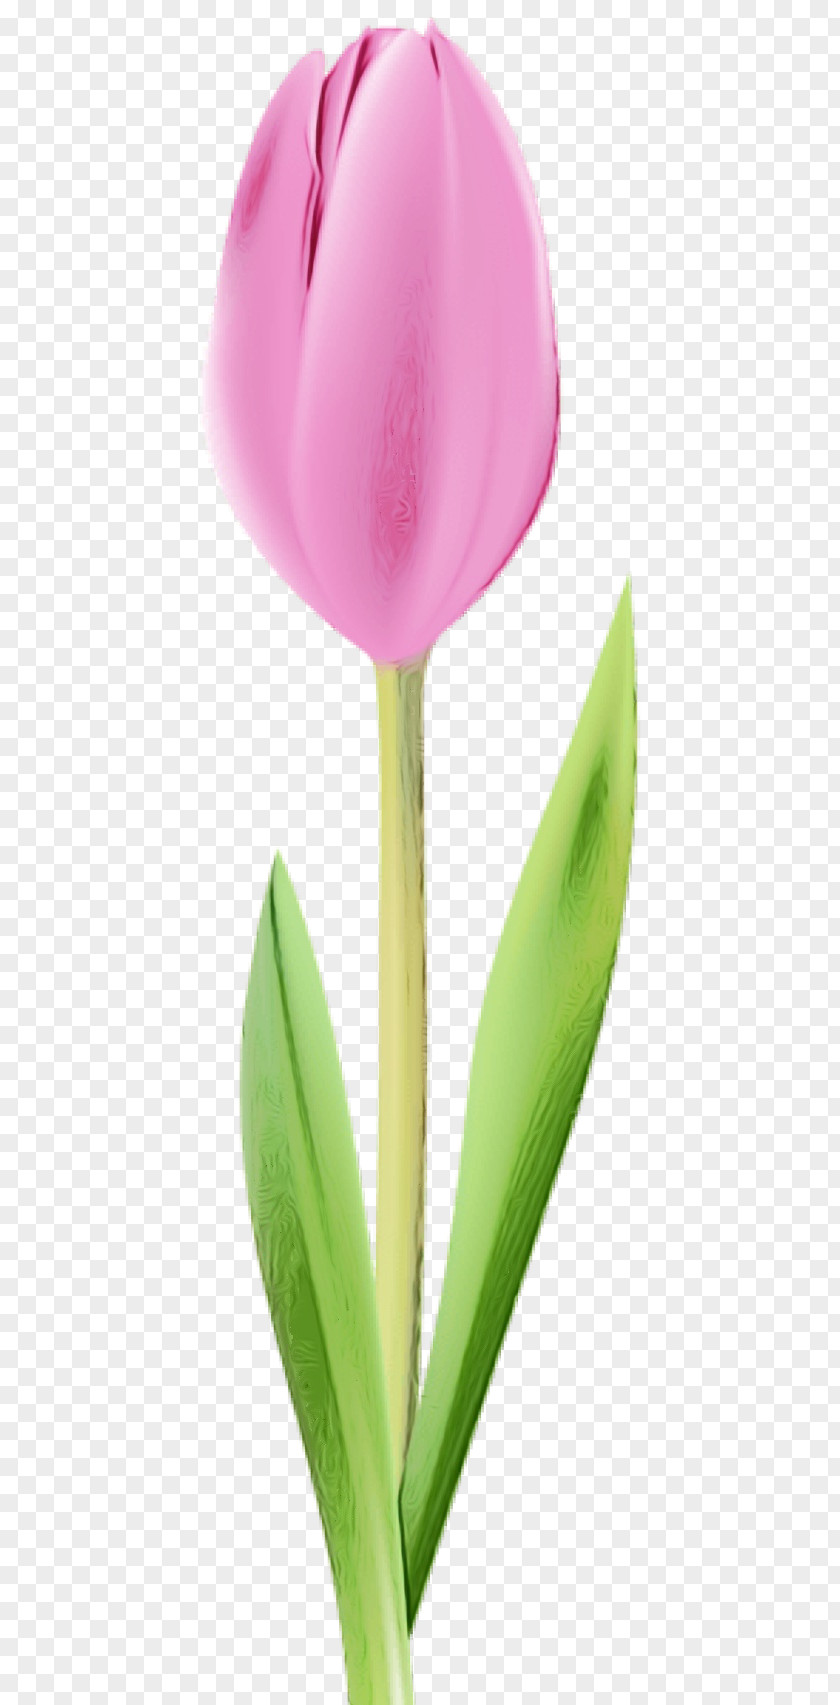 Bud Lily Family Flower Tulip Petal Plant Flowering PNG